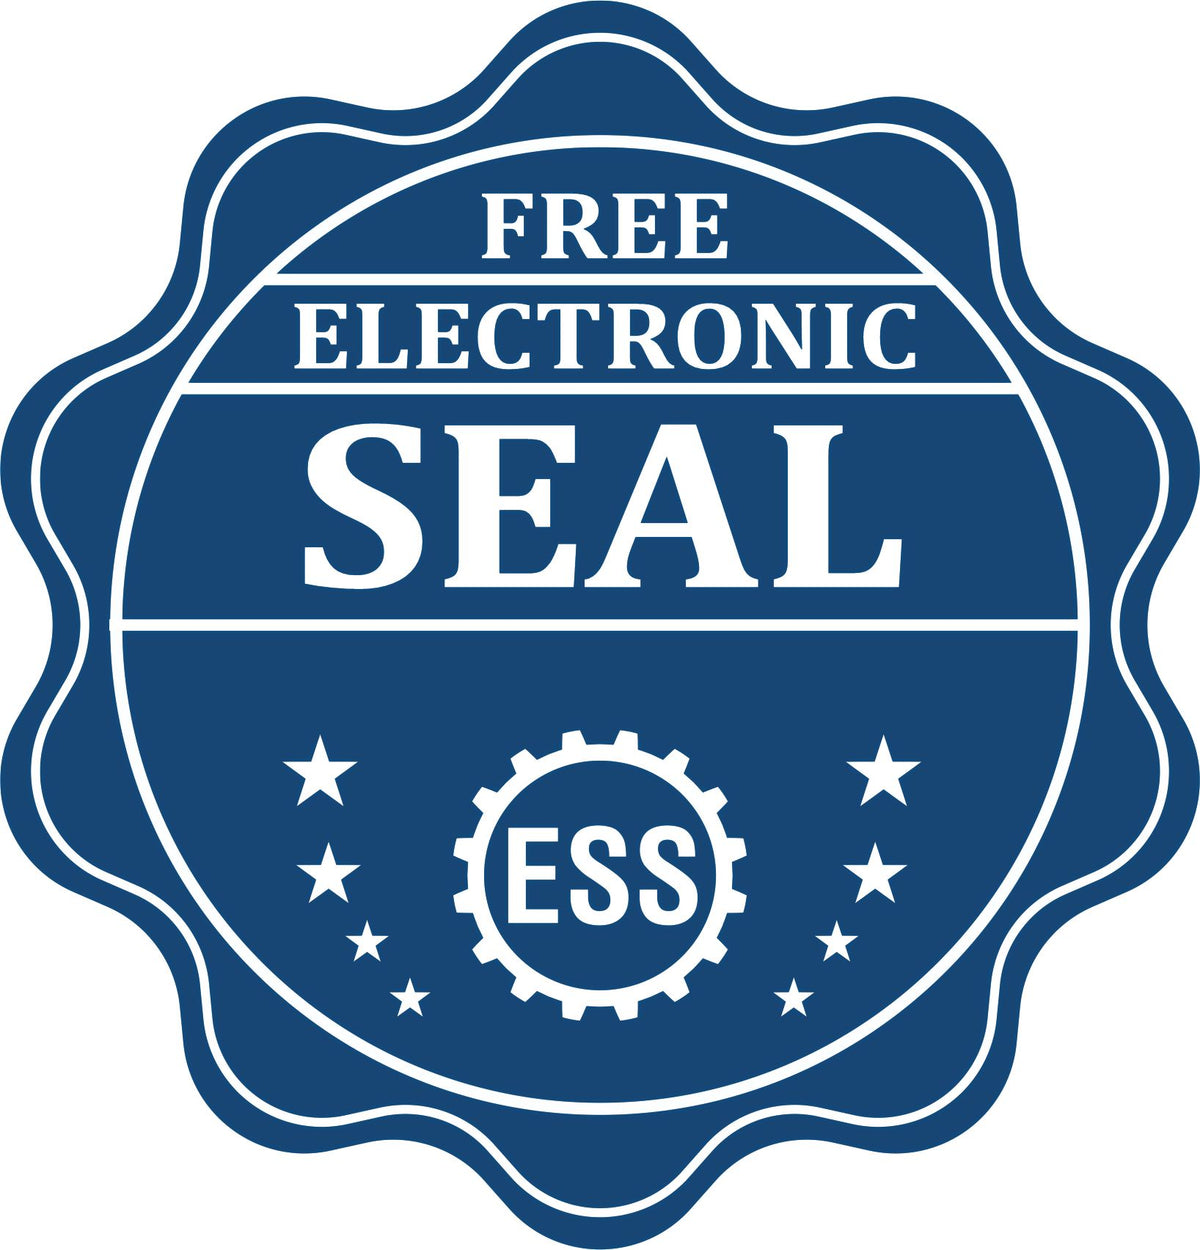 A badge showing a free electronic seal for the Soft Ohio Professional Geologist Seal with stars and the ESS gear on the emblem.